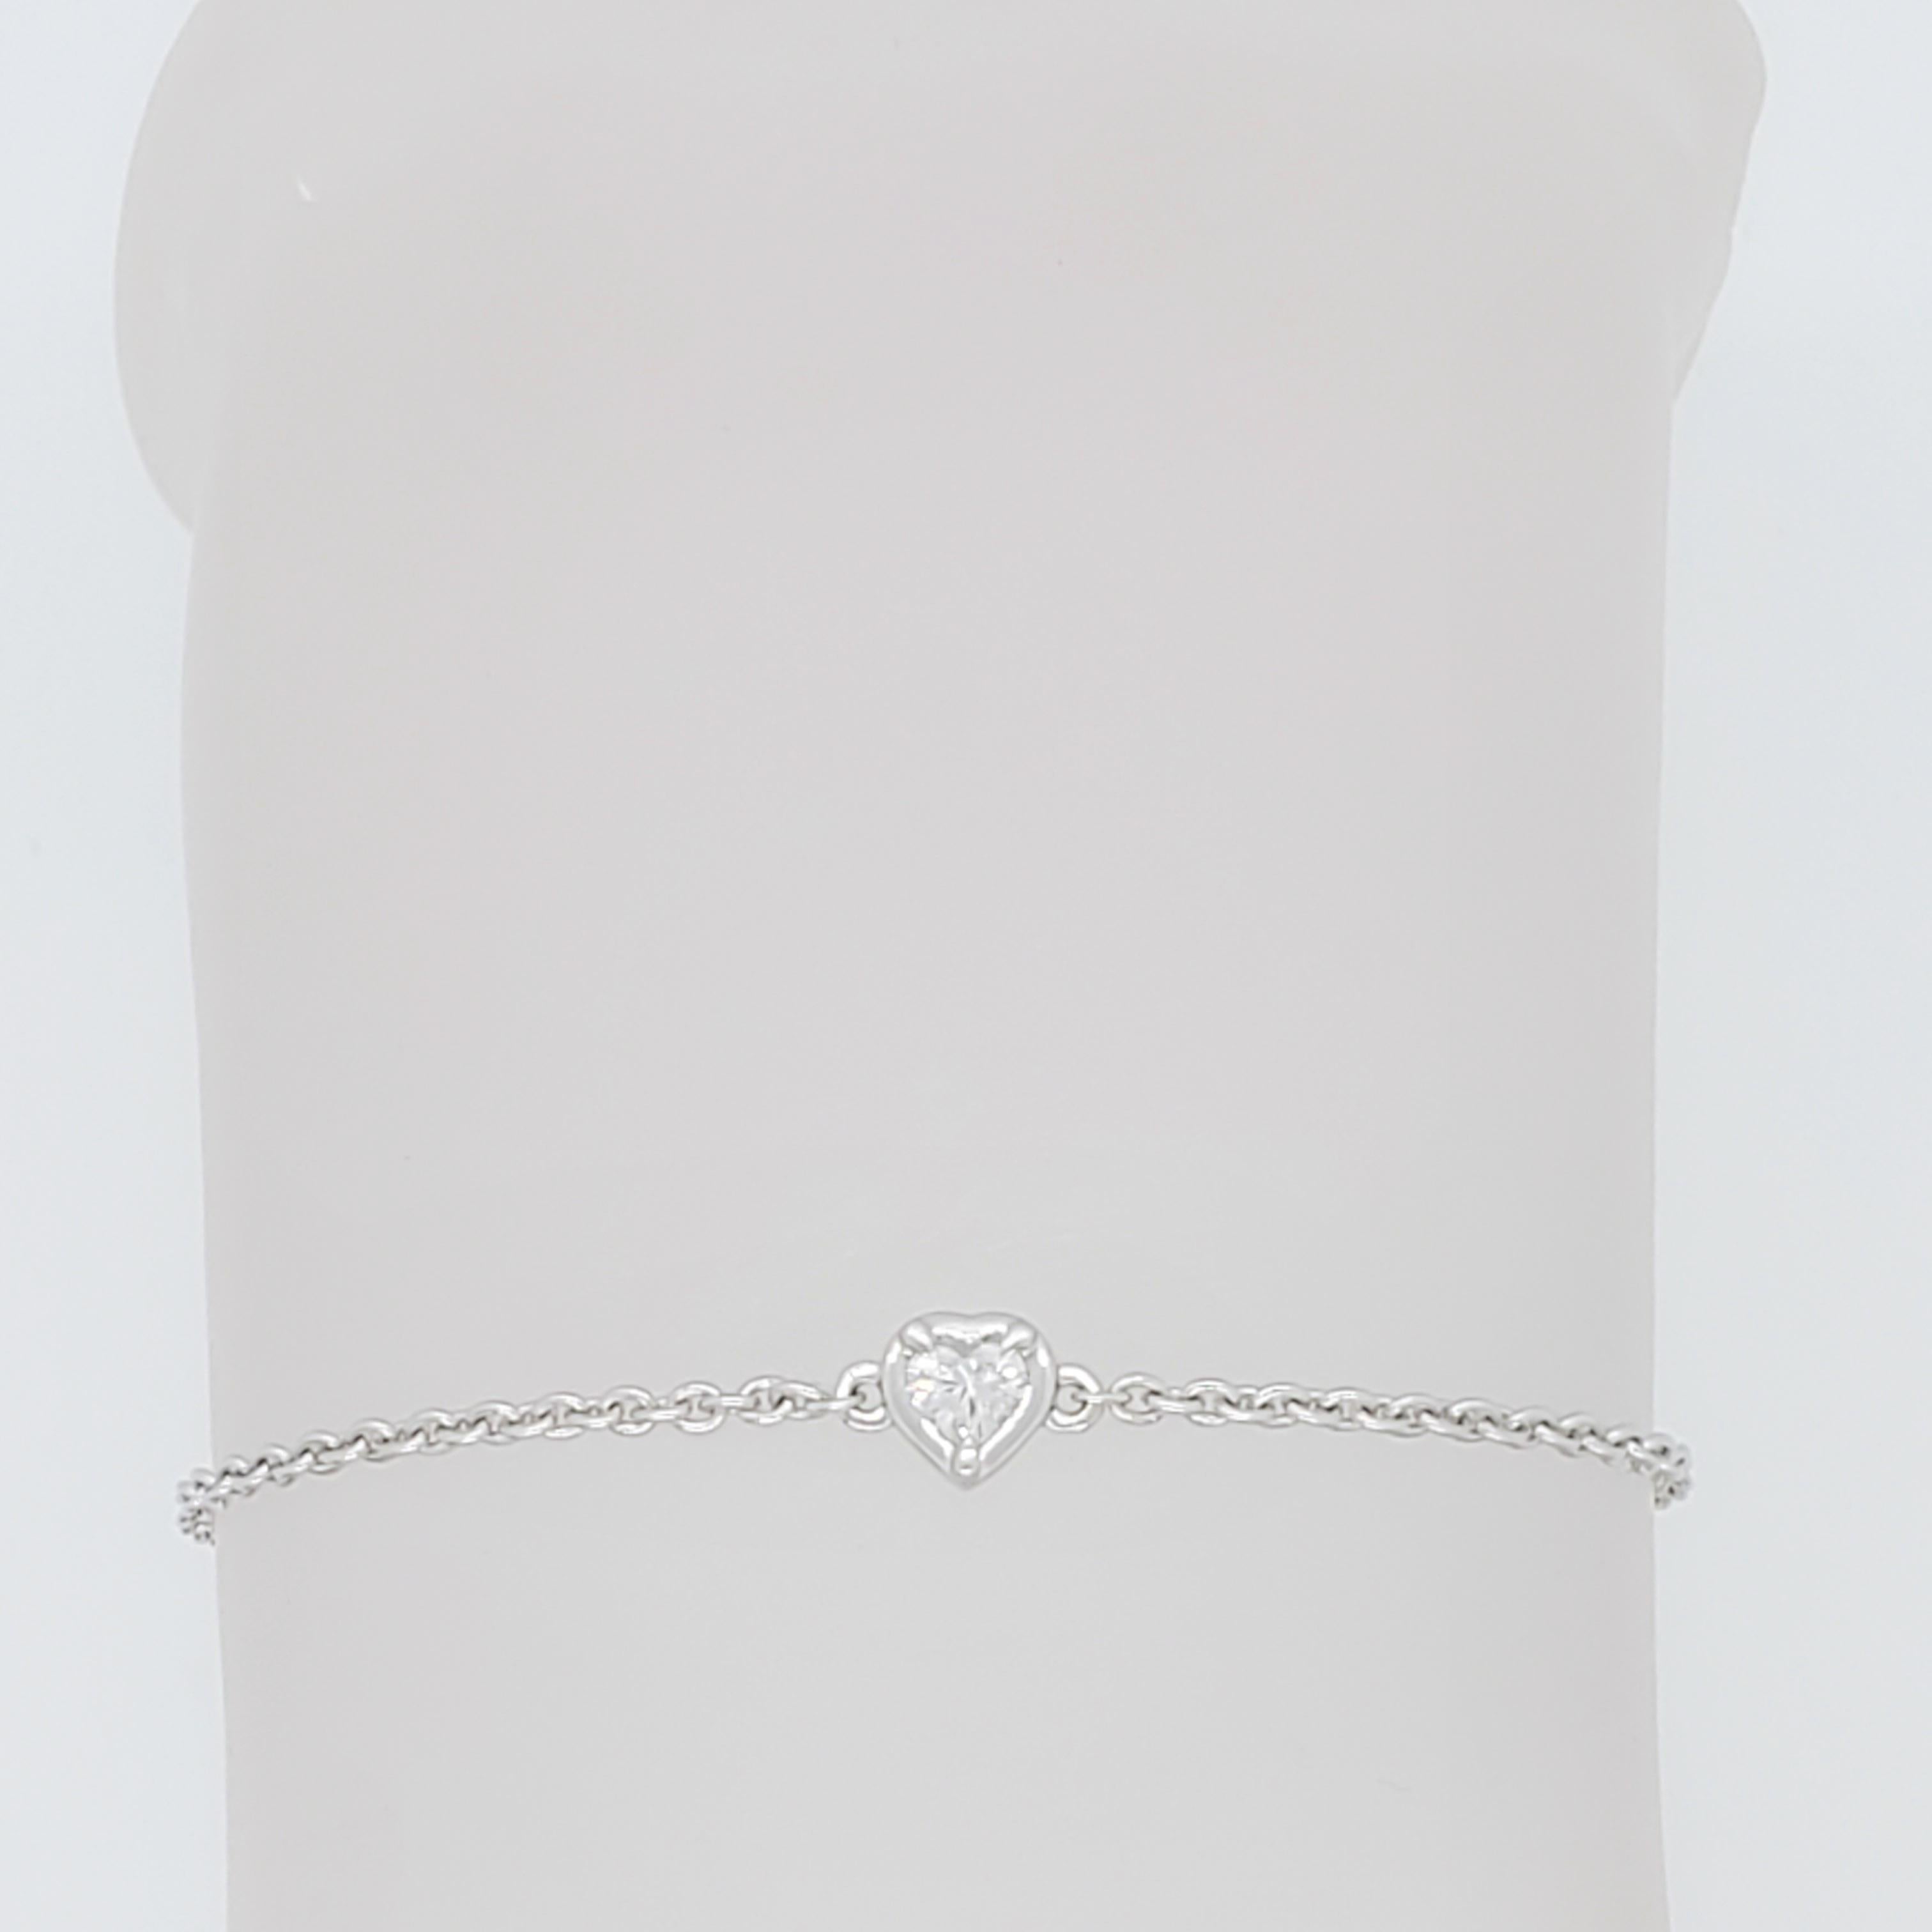 Beautiful and simple 0.15 ct. heart cut white diamond bezel set with 18k white gold chain.  Length is 7.25.